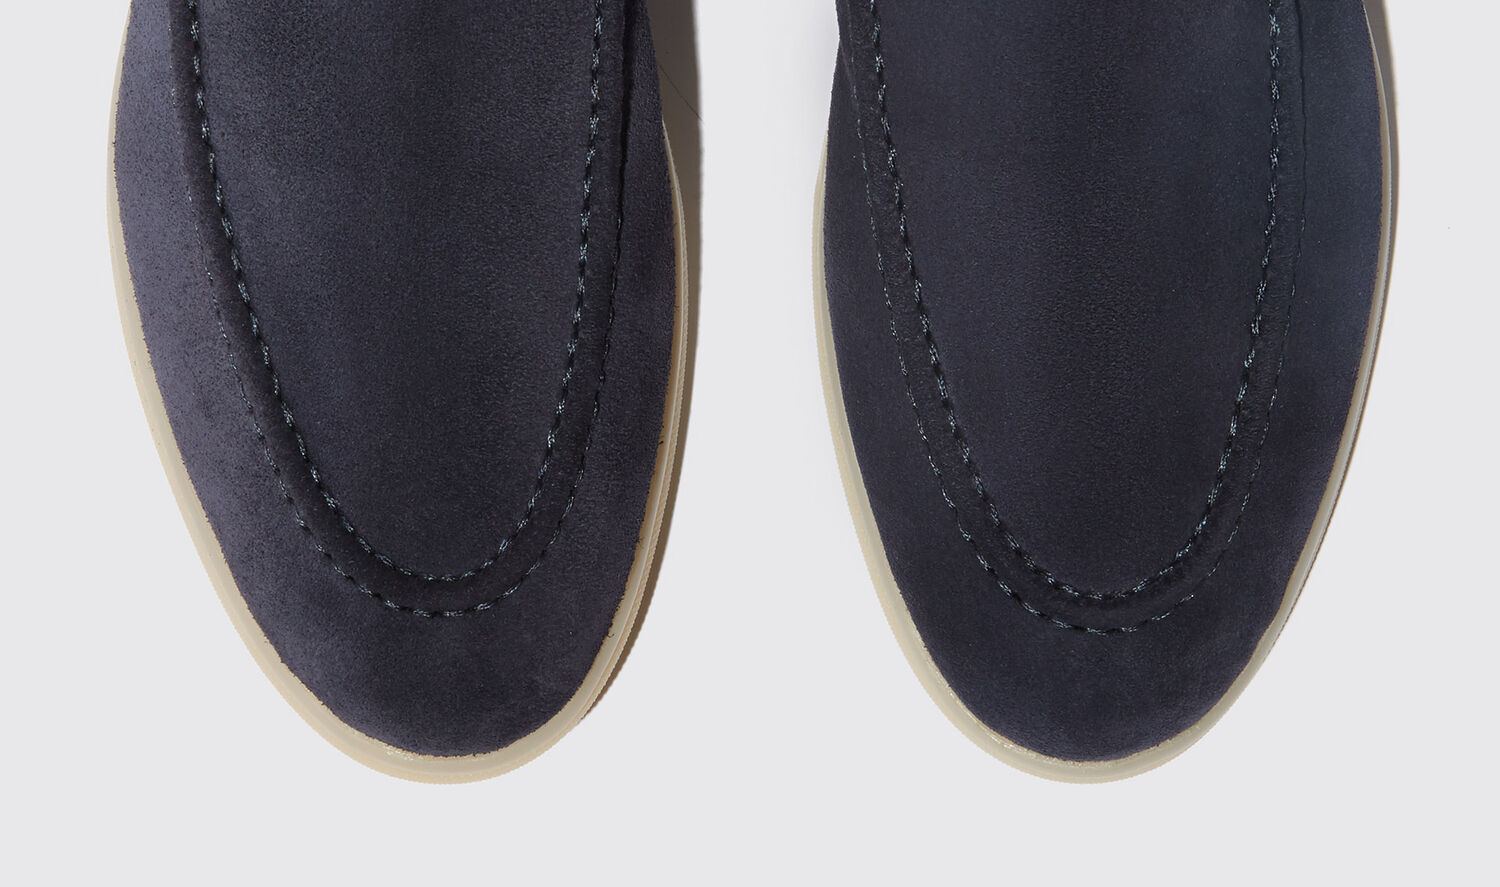 Shop Scarosso Eugenia Blu Scamosciata - Woman Chelsea Boots Blue In Blue - Suede Leather